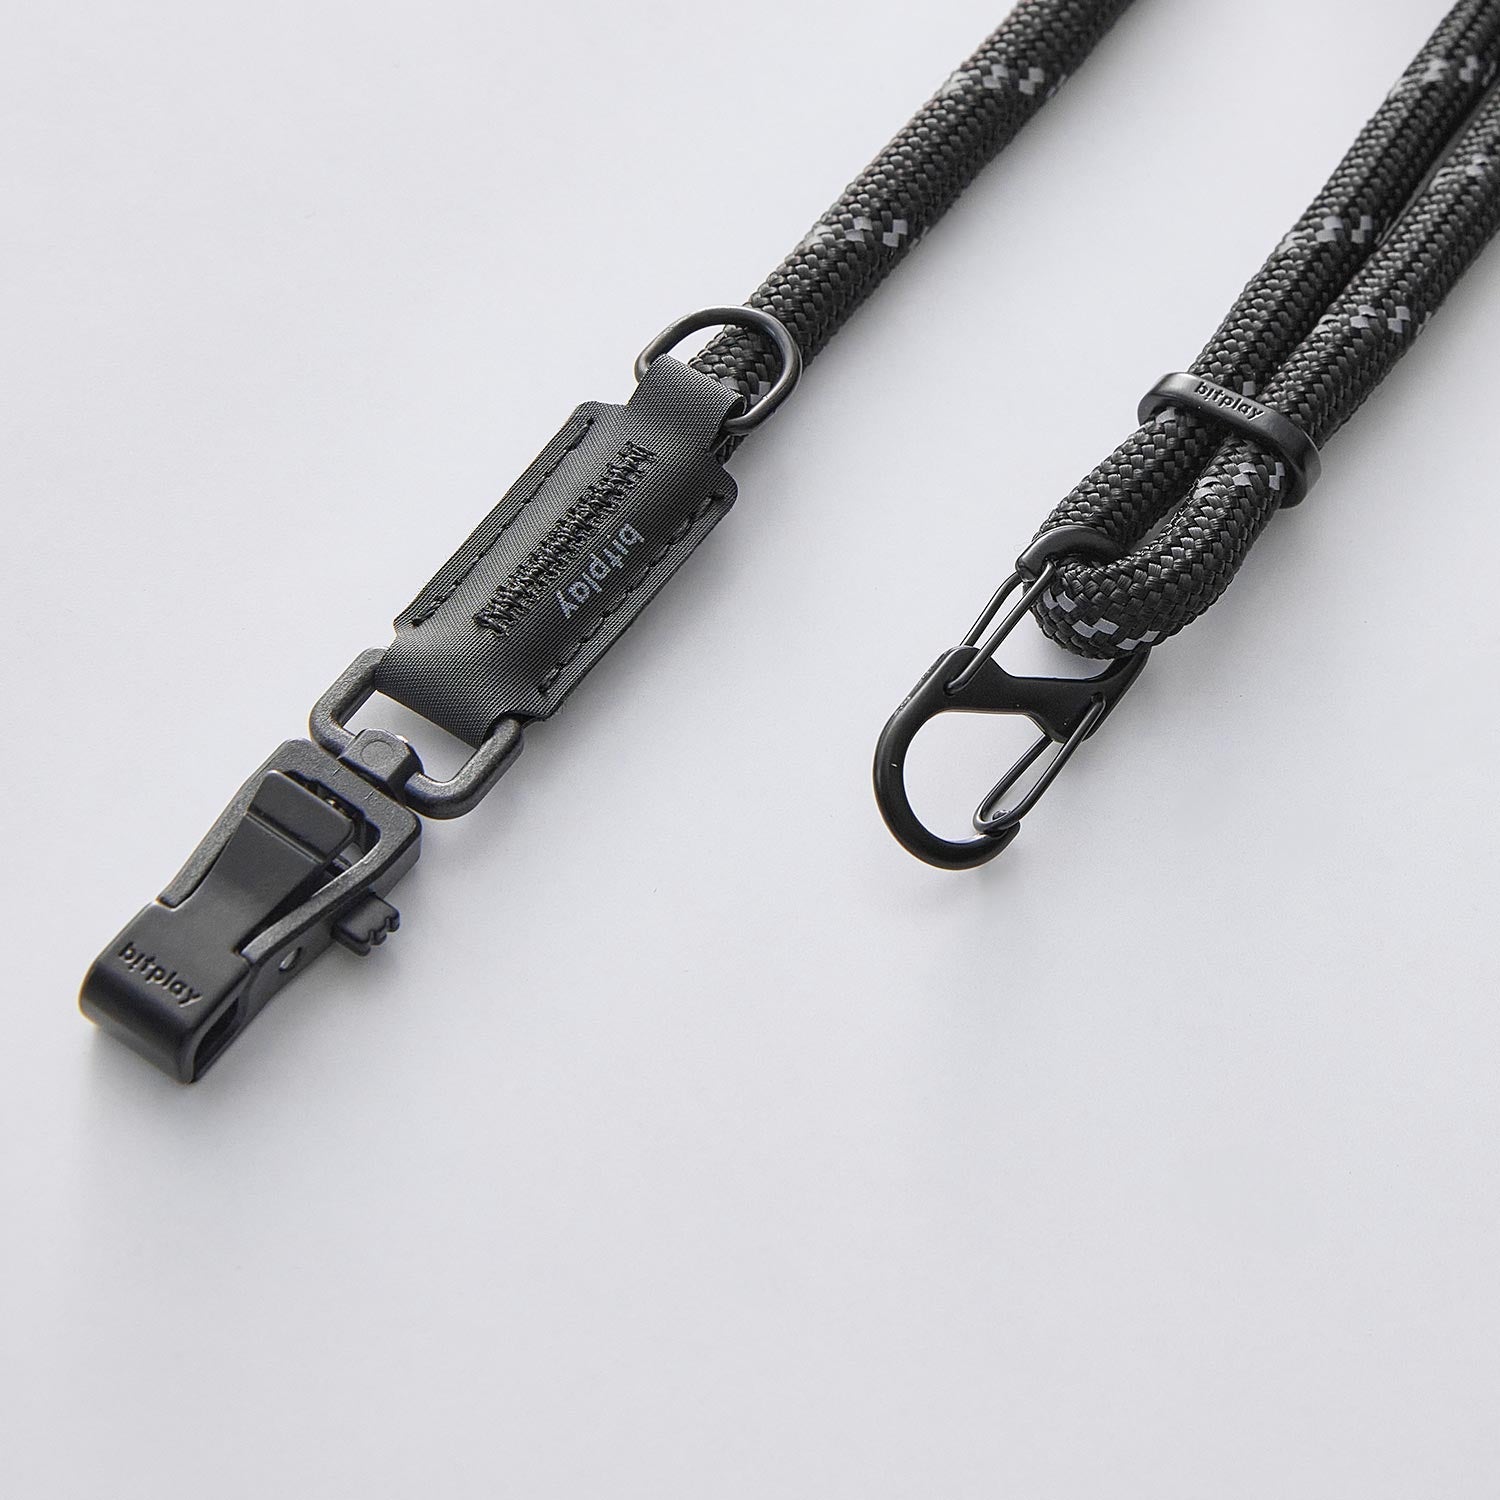 8mm Lite Strap - Black  (Strap Adapter included）